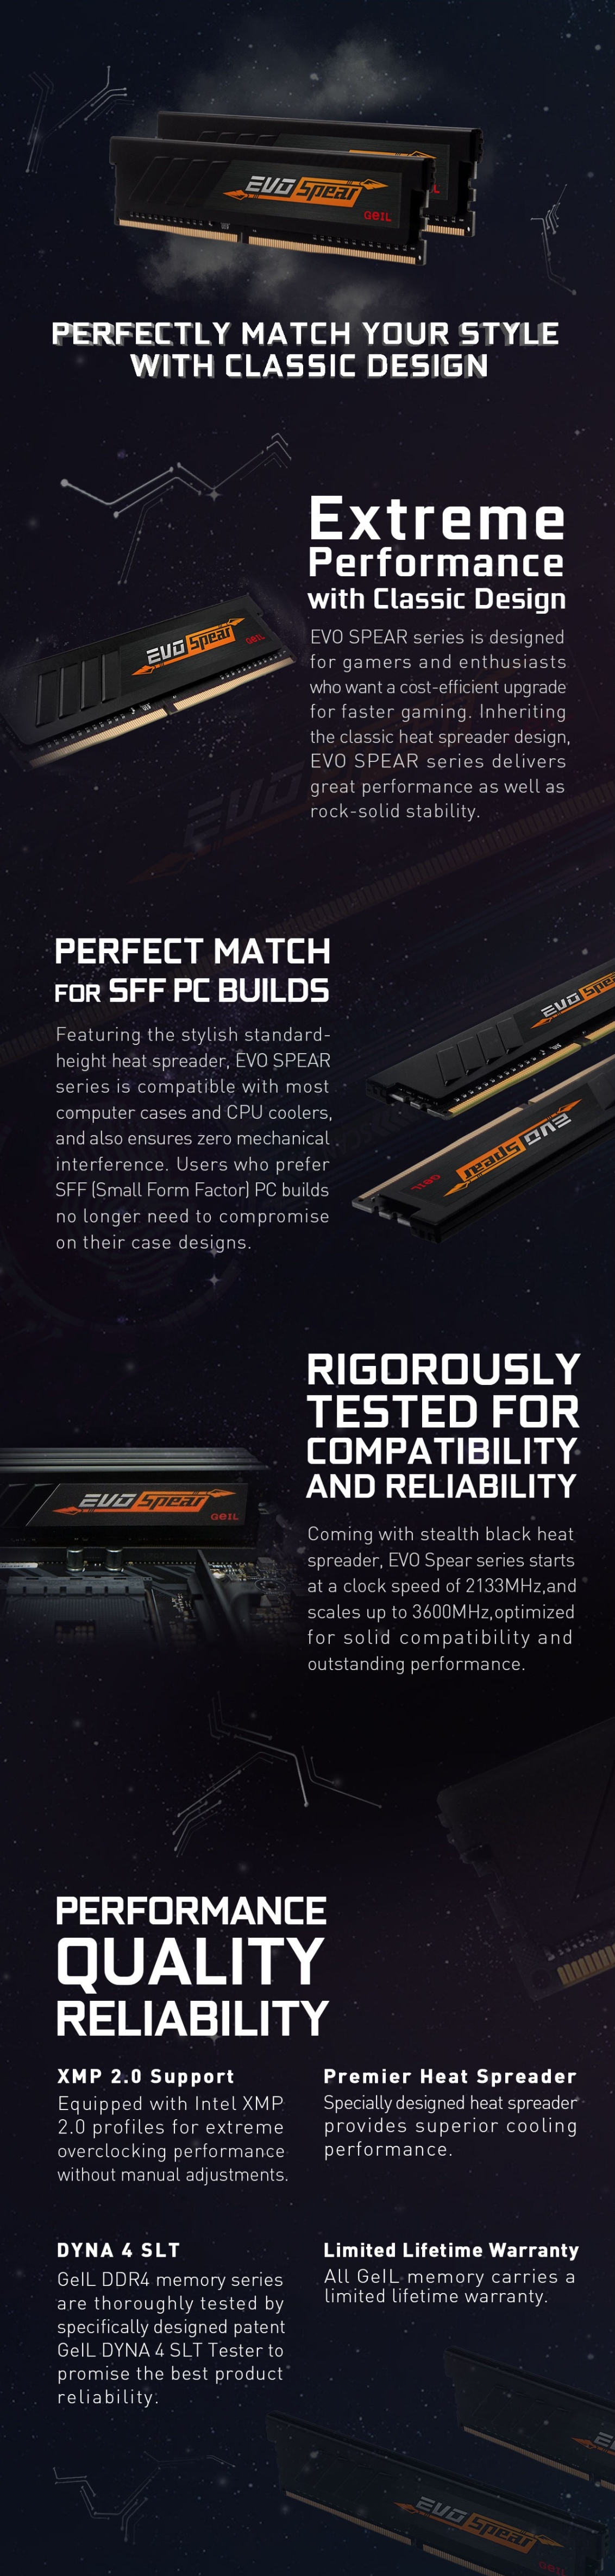 A large marketing image providing additional information about the product GeIL 16GB Single (1x16GB) DDR4 EVO SPEAR C22 3200MHz - Black - Additional alt info not provided